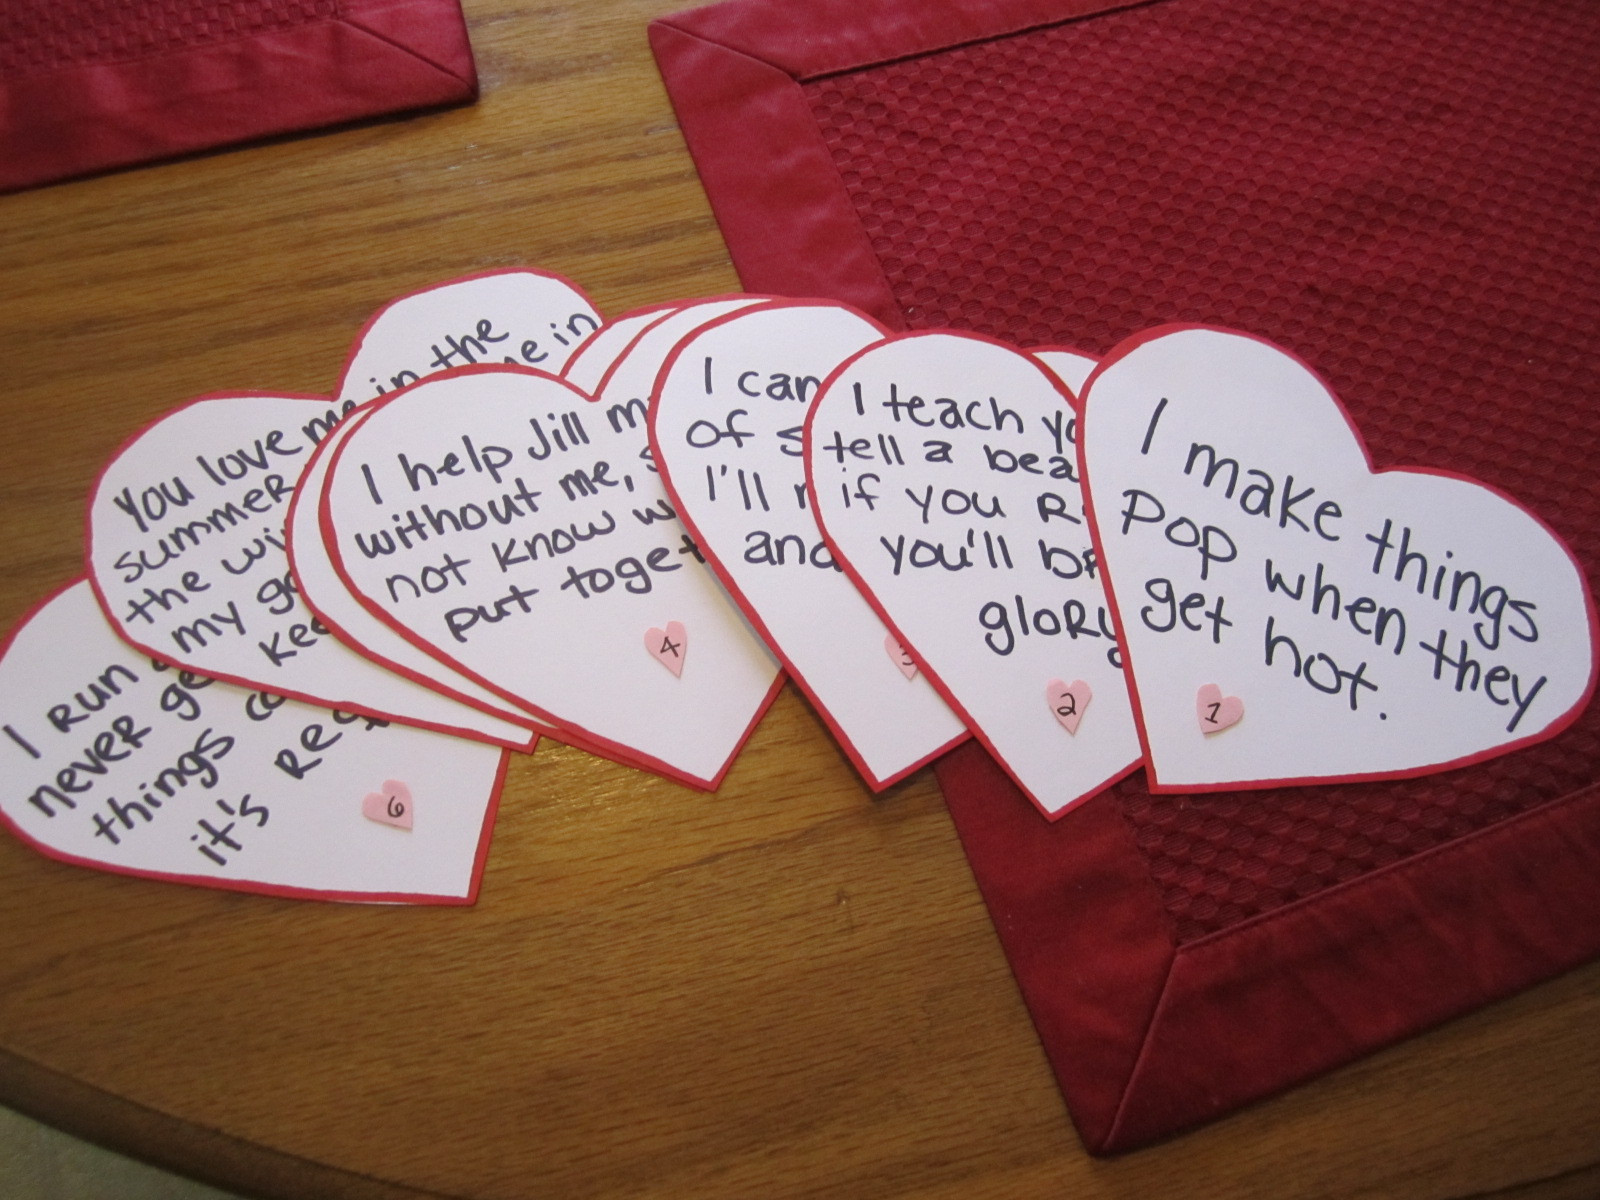 Valentine Homemade Gift Ideas Him
 Ten DIY Valentine’s Day Gifts for him and her